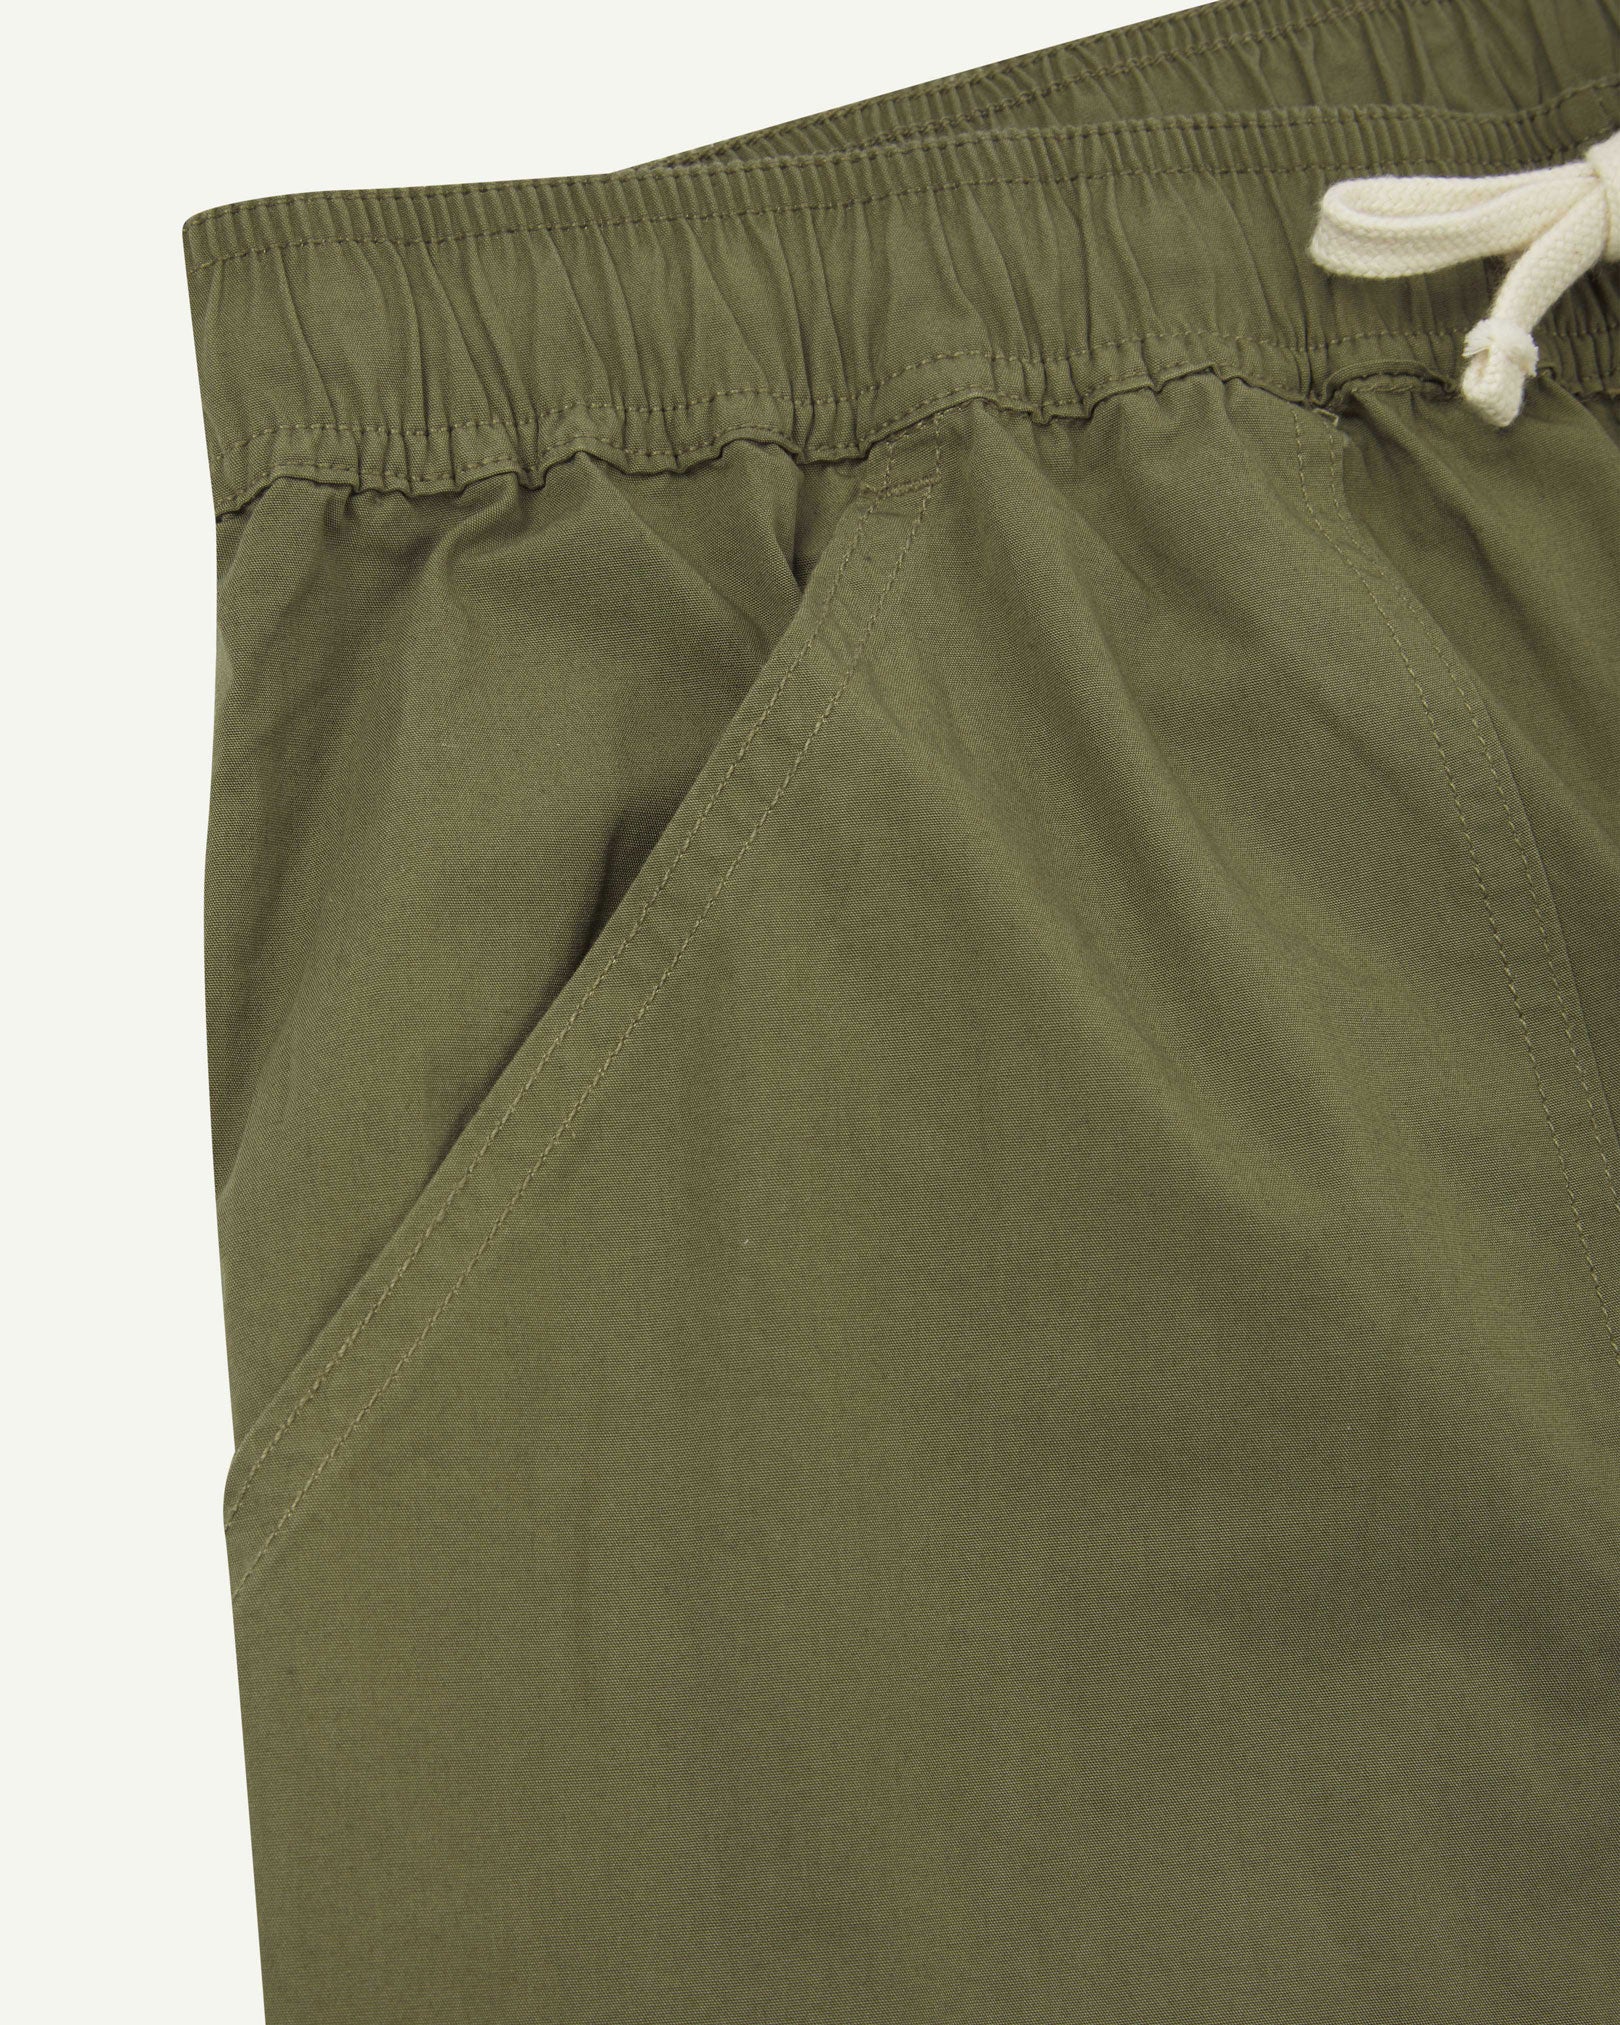 Front close-up shot of Uskees 5020 lightweight utility pants in olive-green showing waist and front pocket detail.